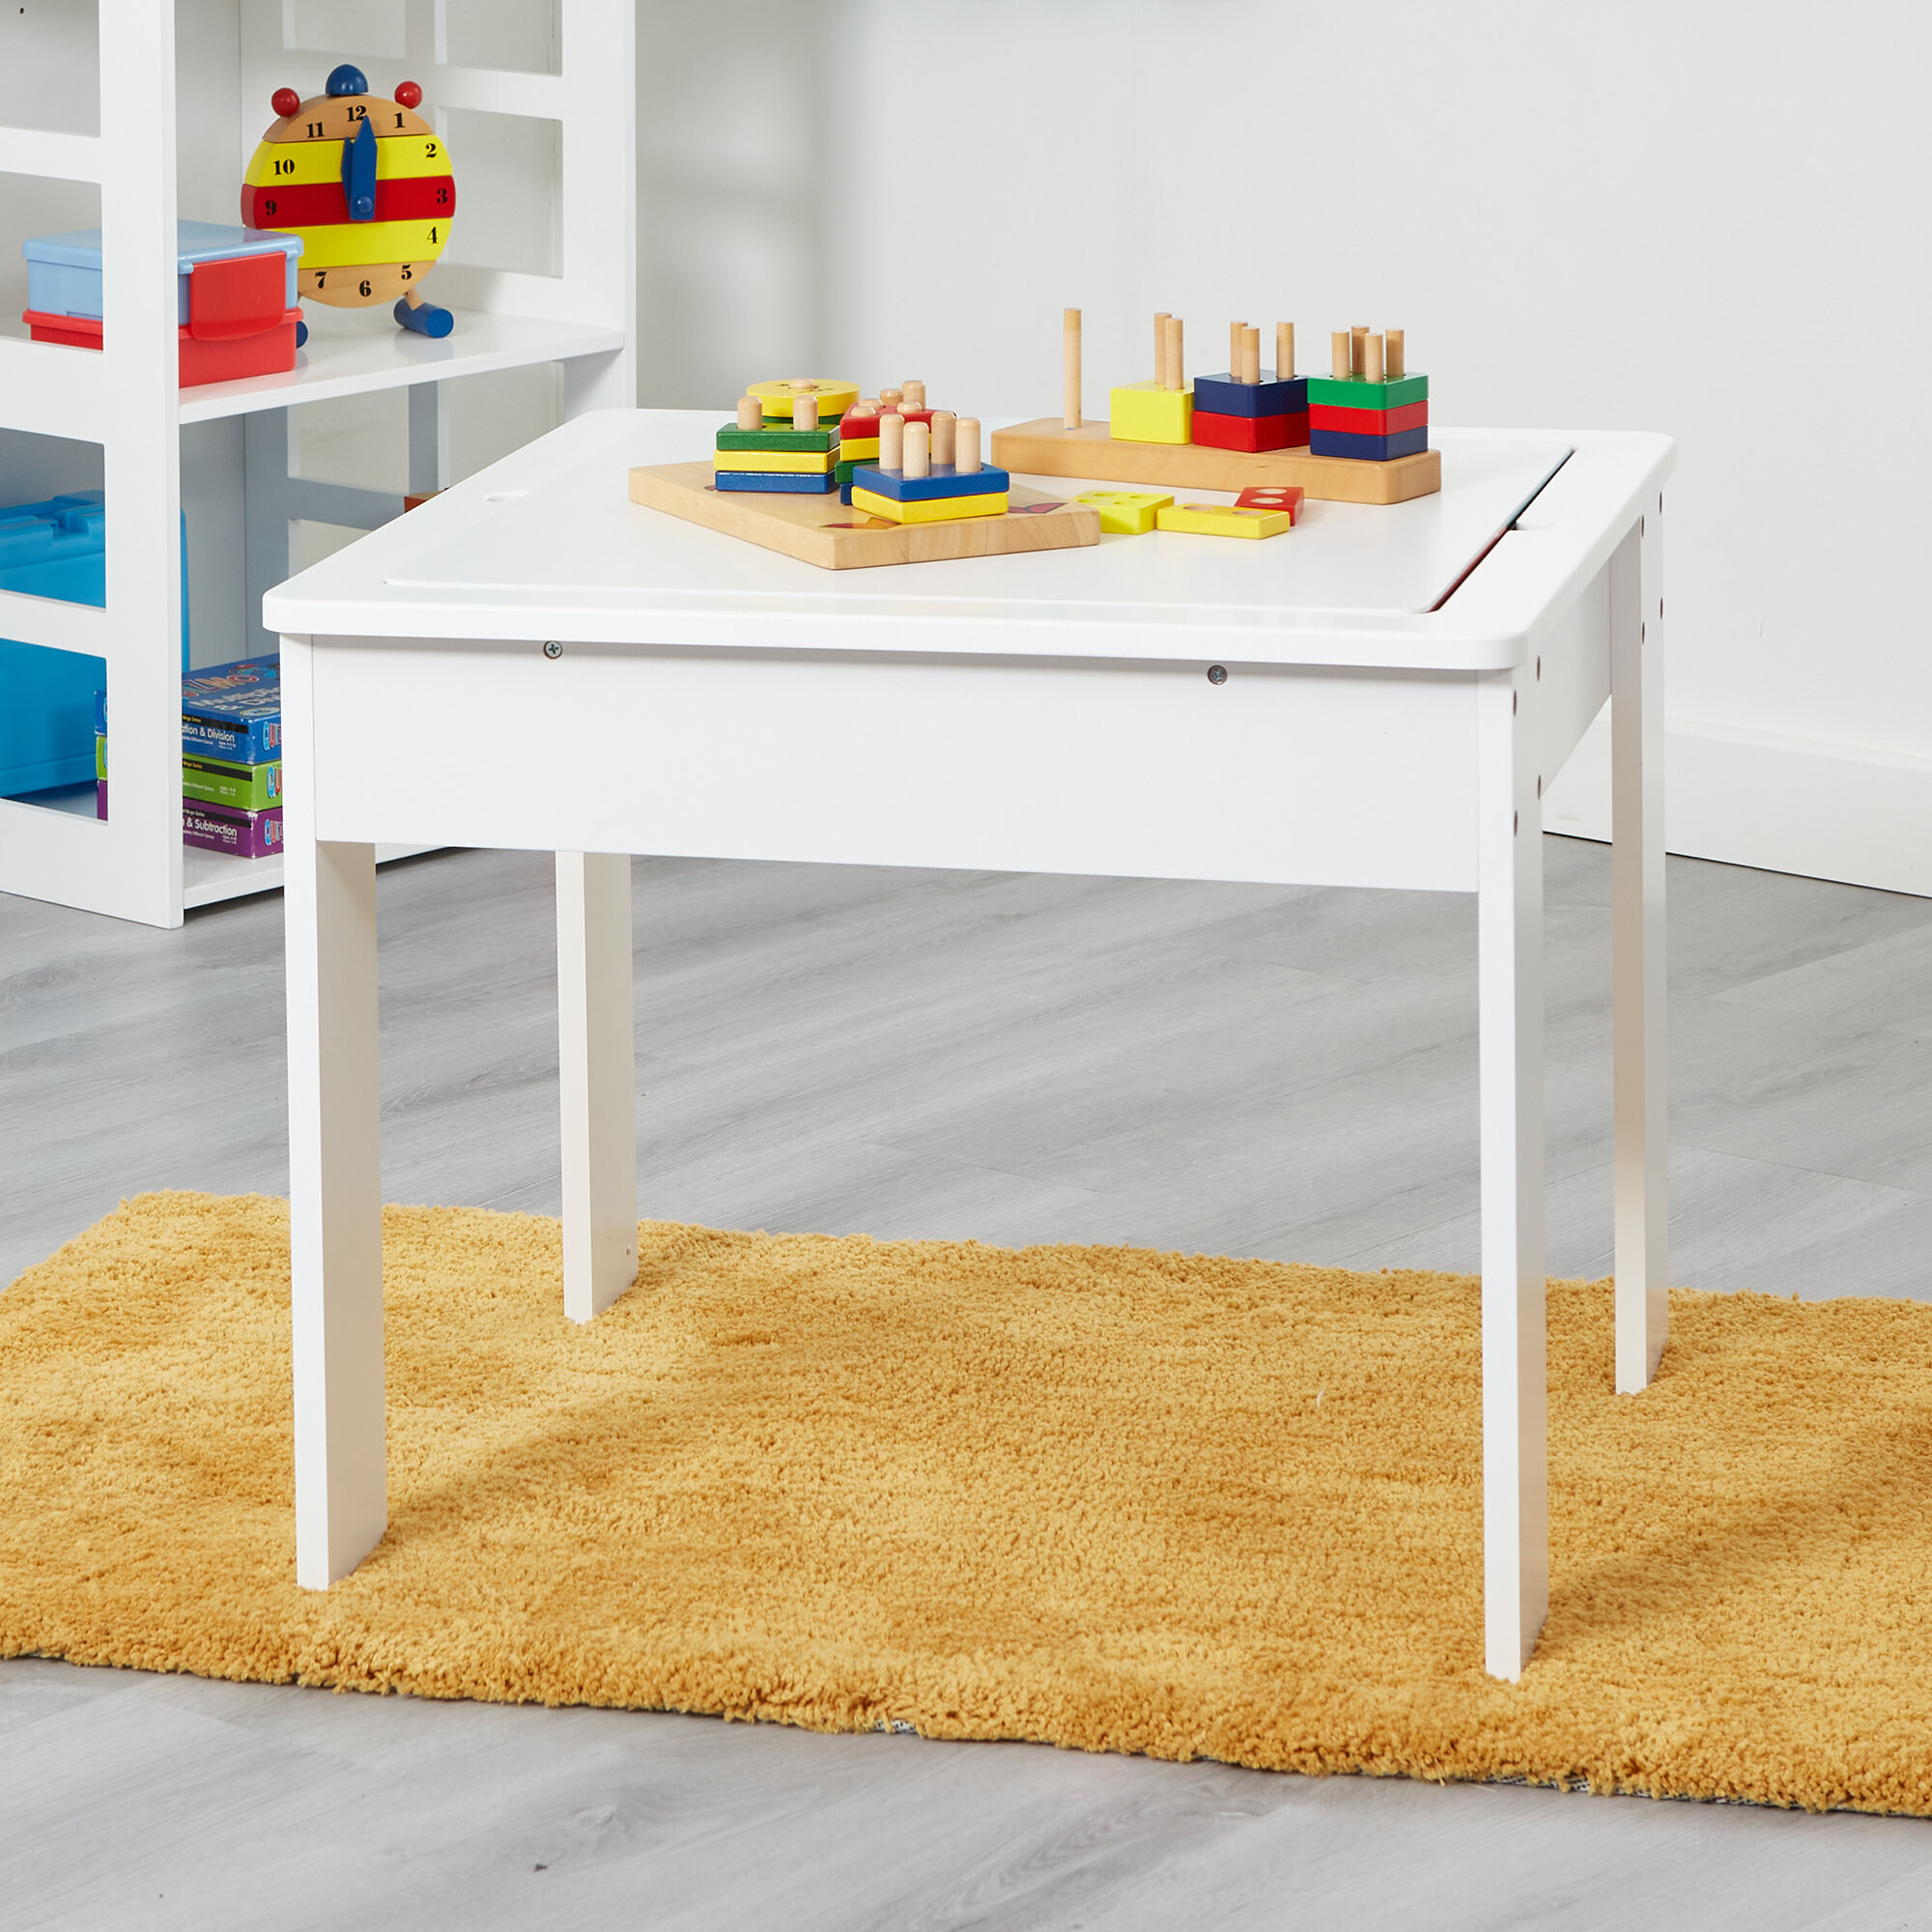 SALE／100%OFF】 UTEX Large in Kid Activity Table with Storage for Older  Kids, Play Table for Kids,Boys,Girls, Espresso